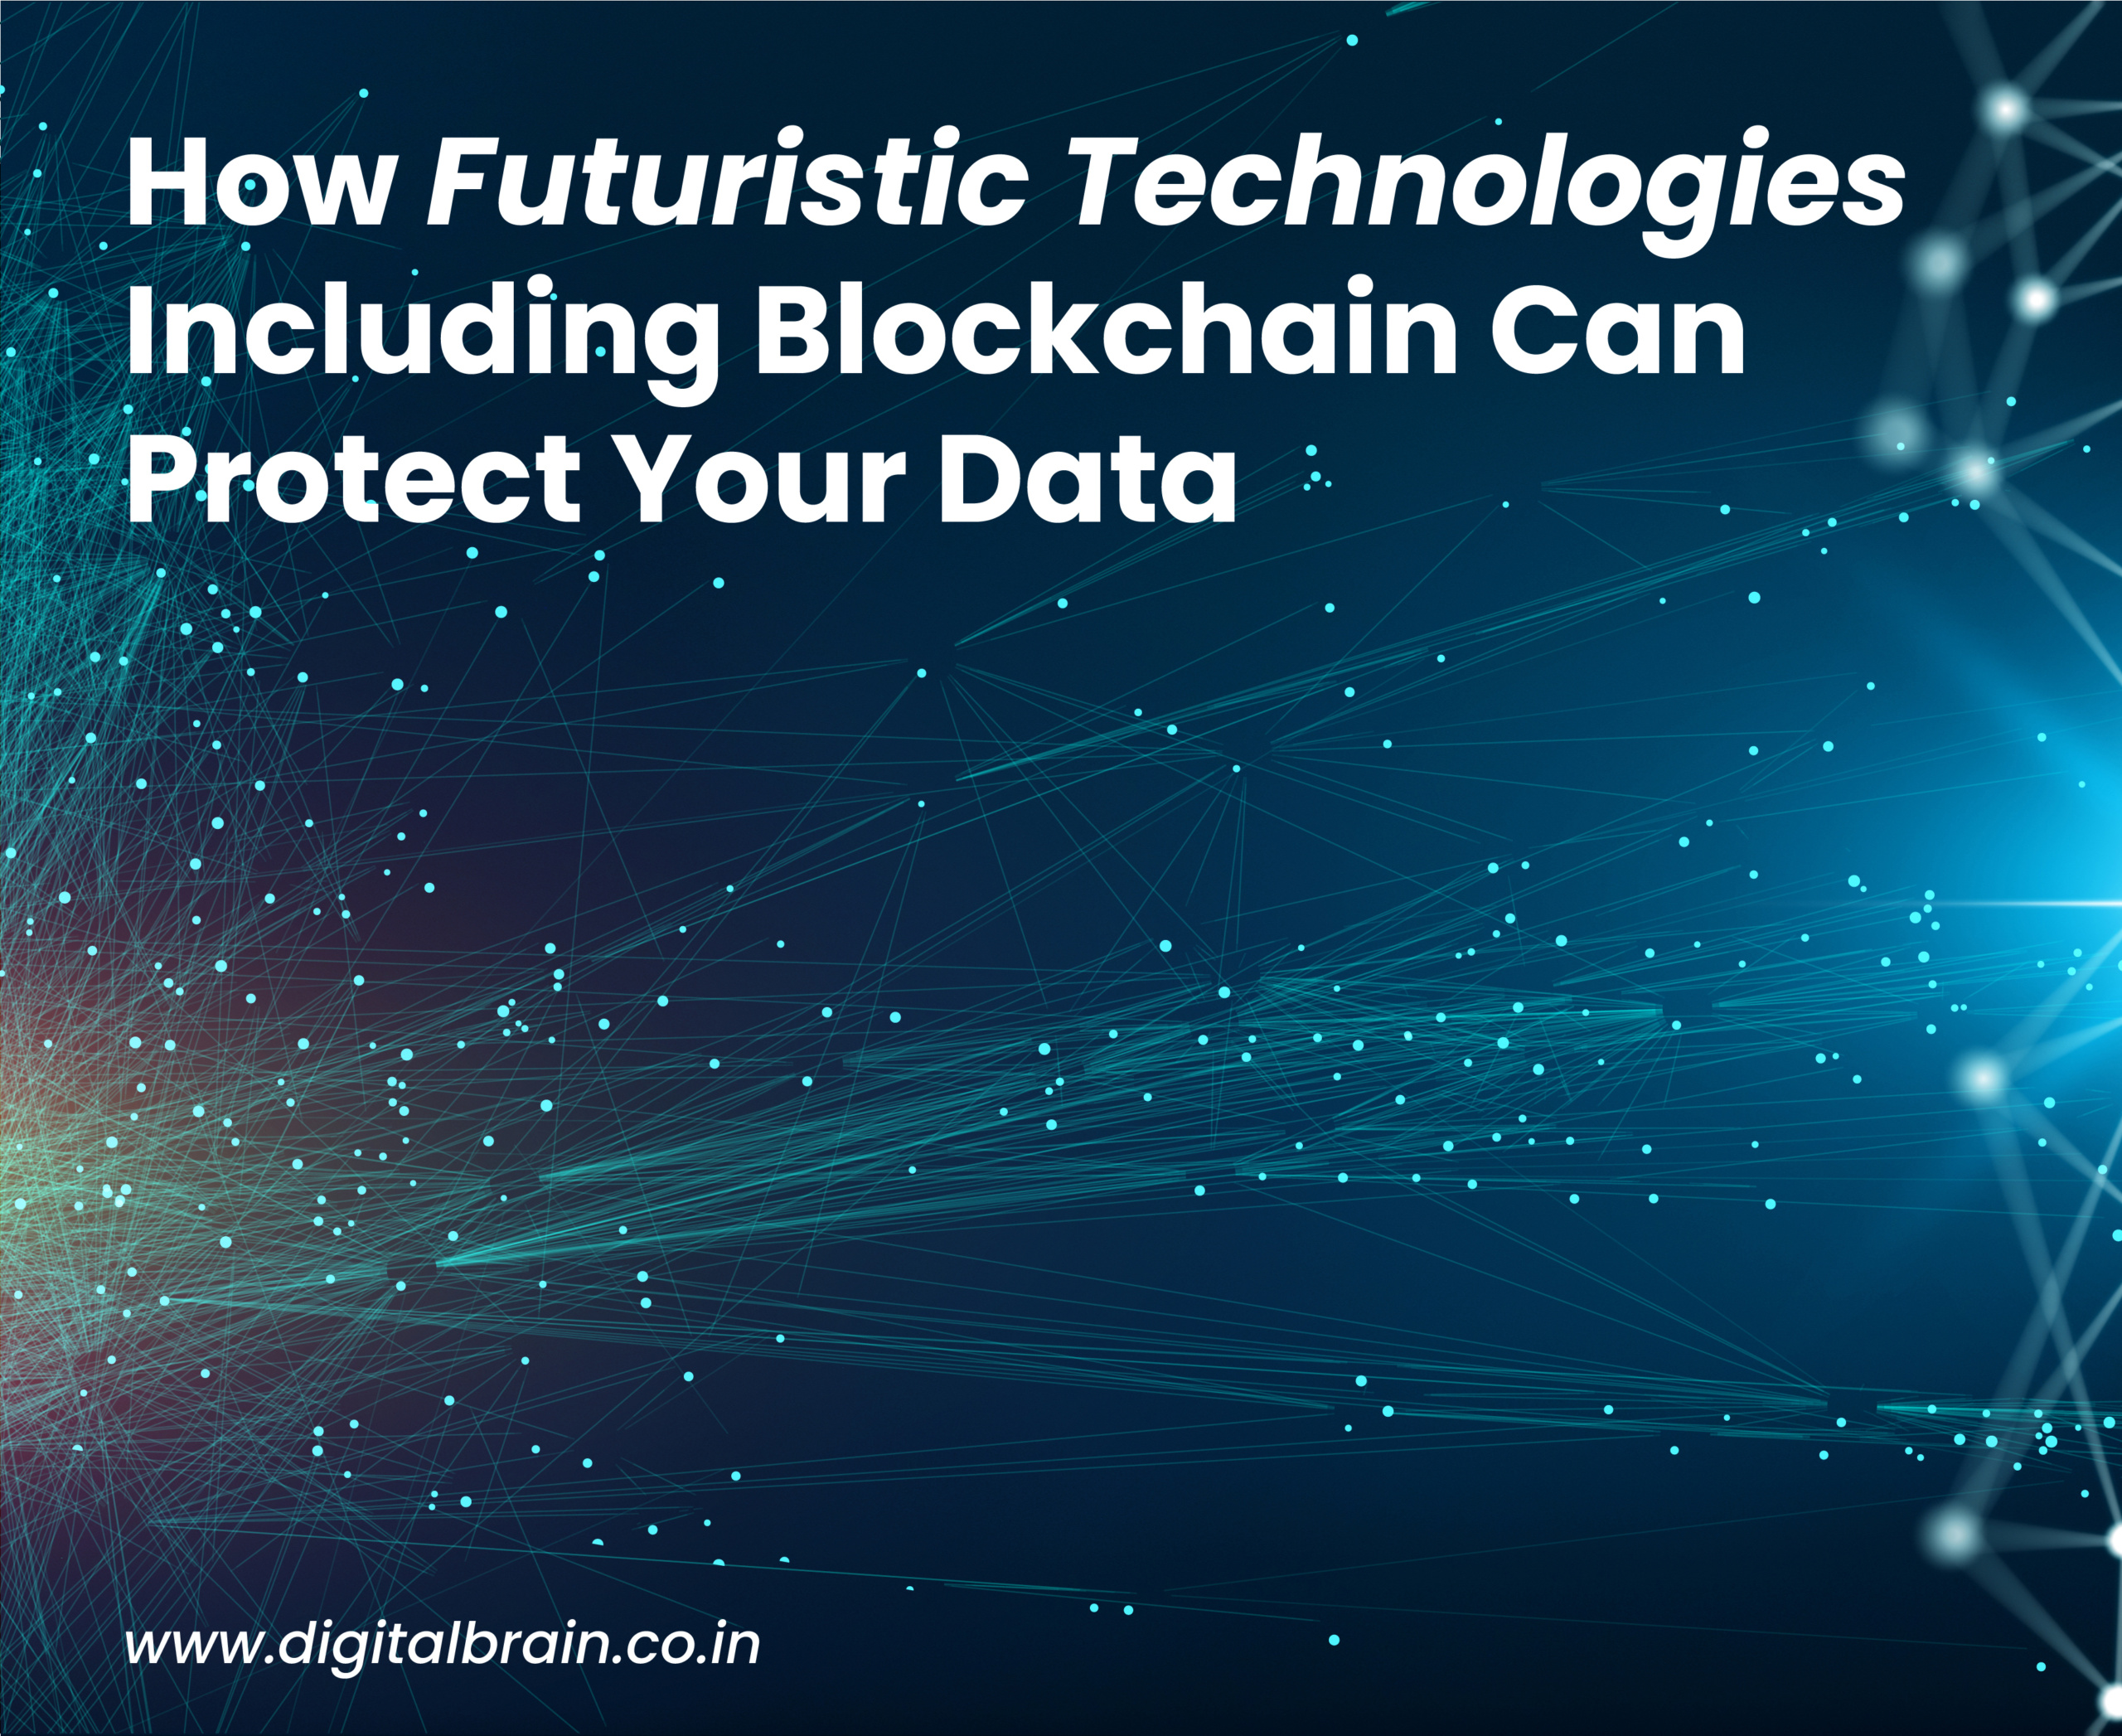 How Futuristic Technologies Including Blockchain Can Protect Your Data?